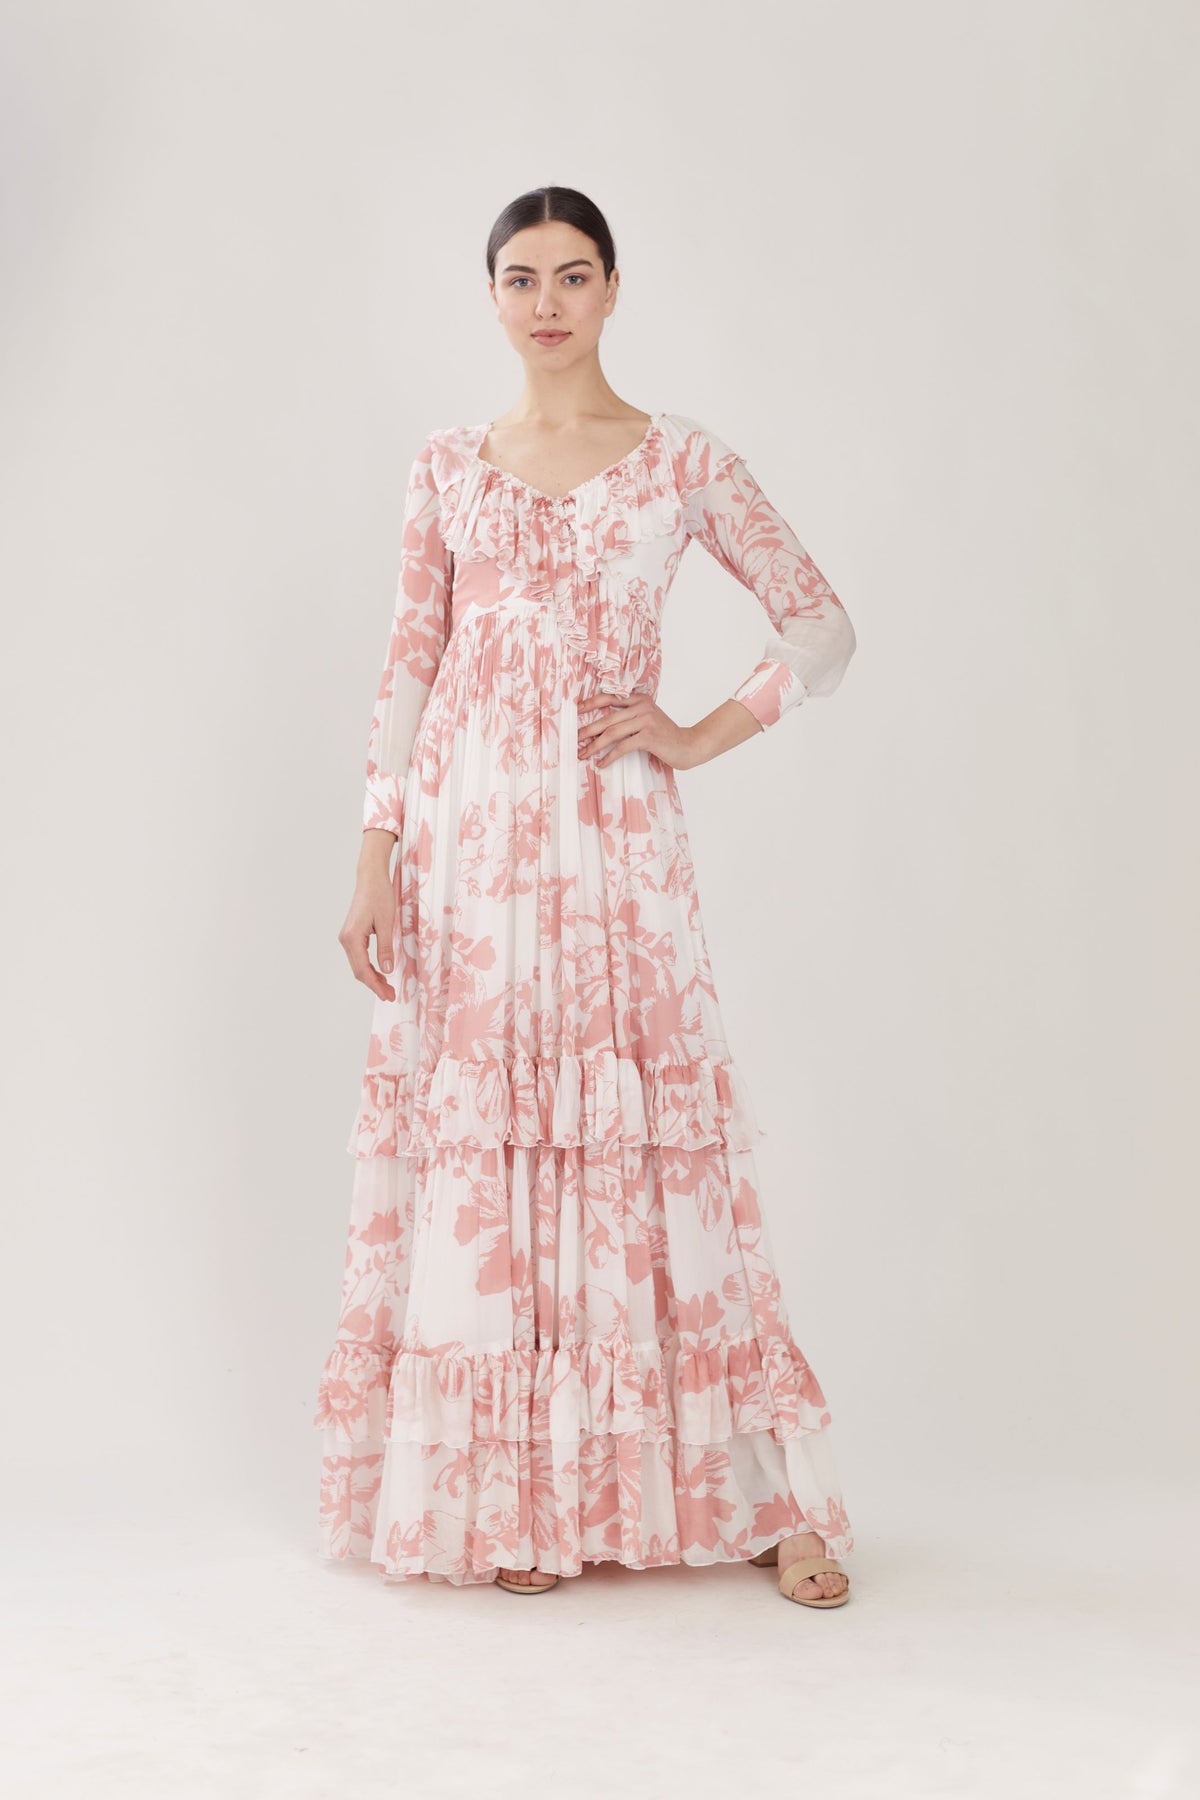 WHITE & PINK FLORAL FRILL LONG DRESS